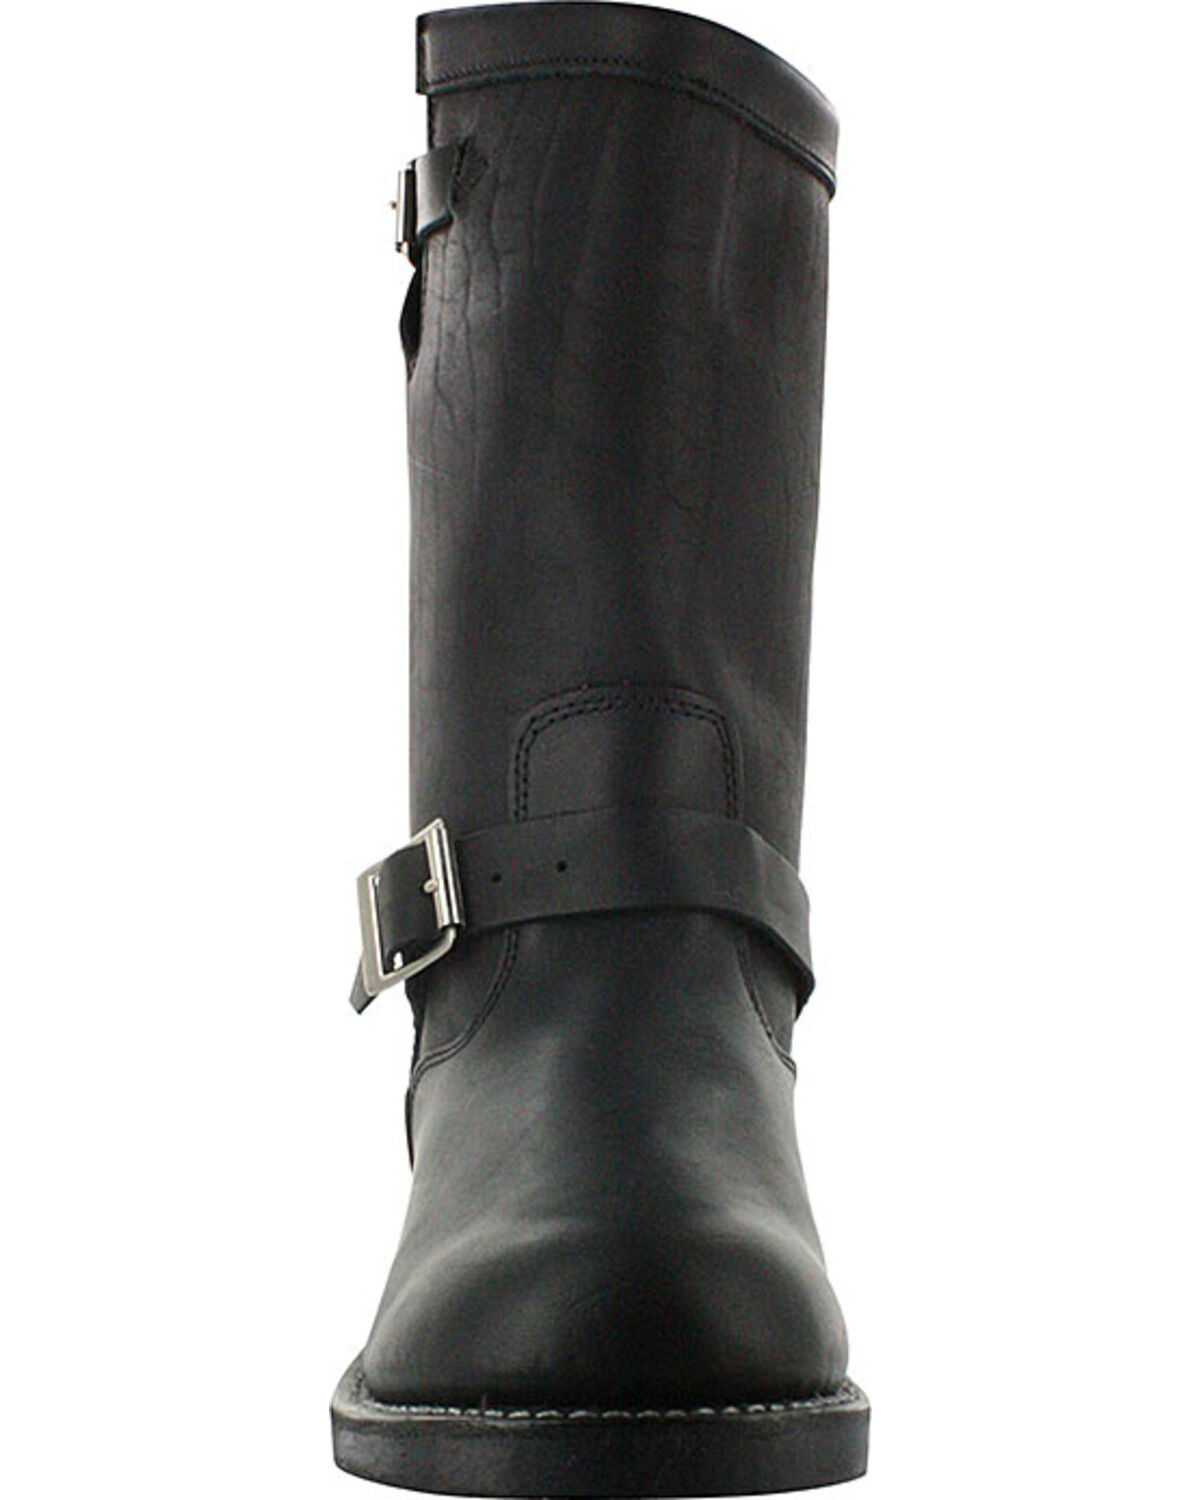 mens black motorcycle riding boots